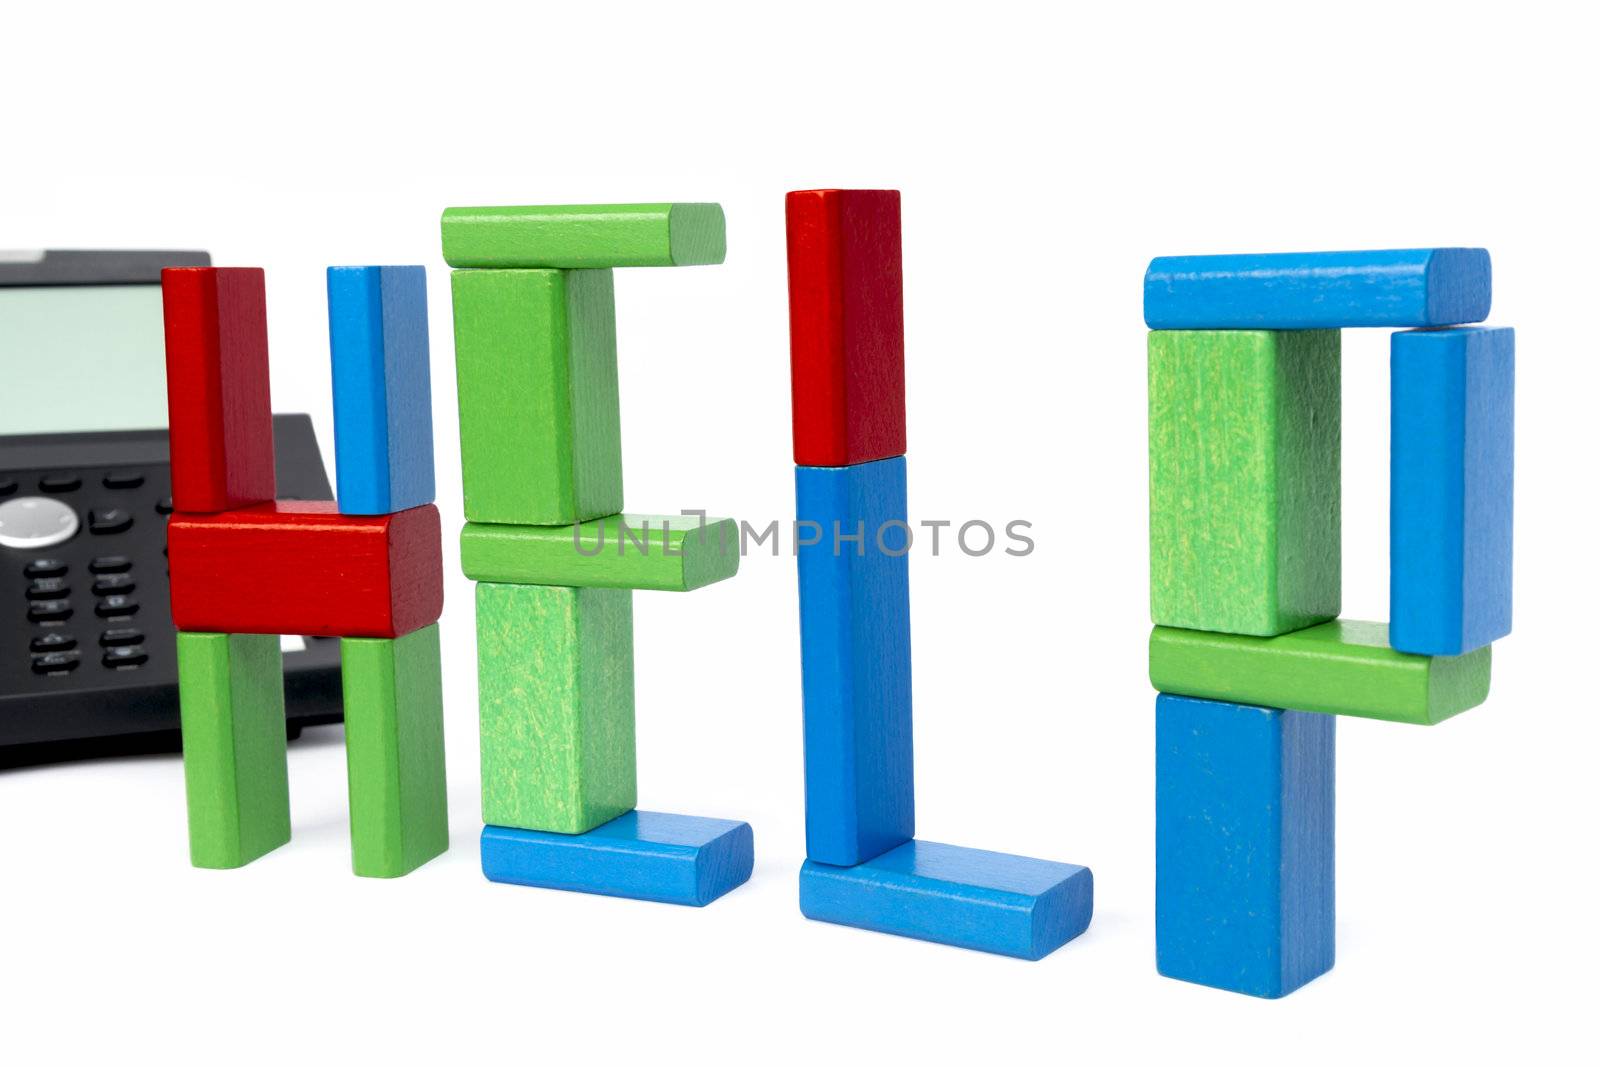 the word help made with toy bricks and a phone in background. isolated on white background